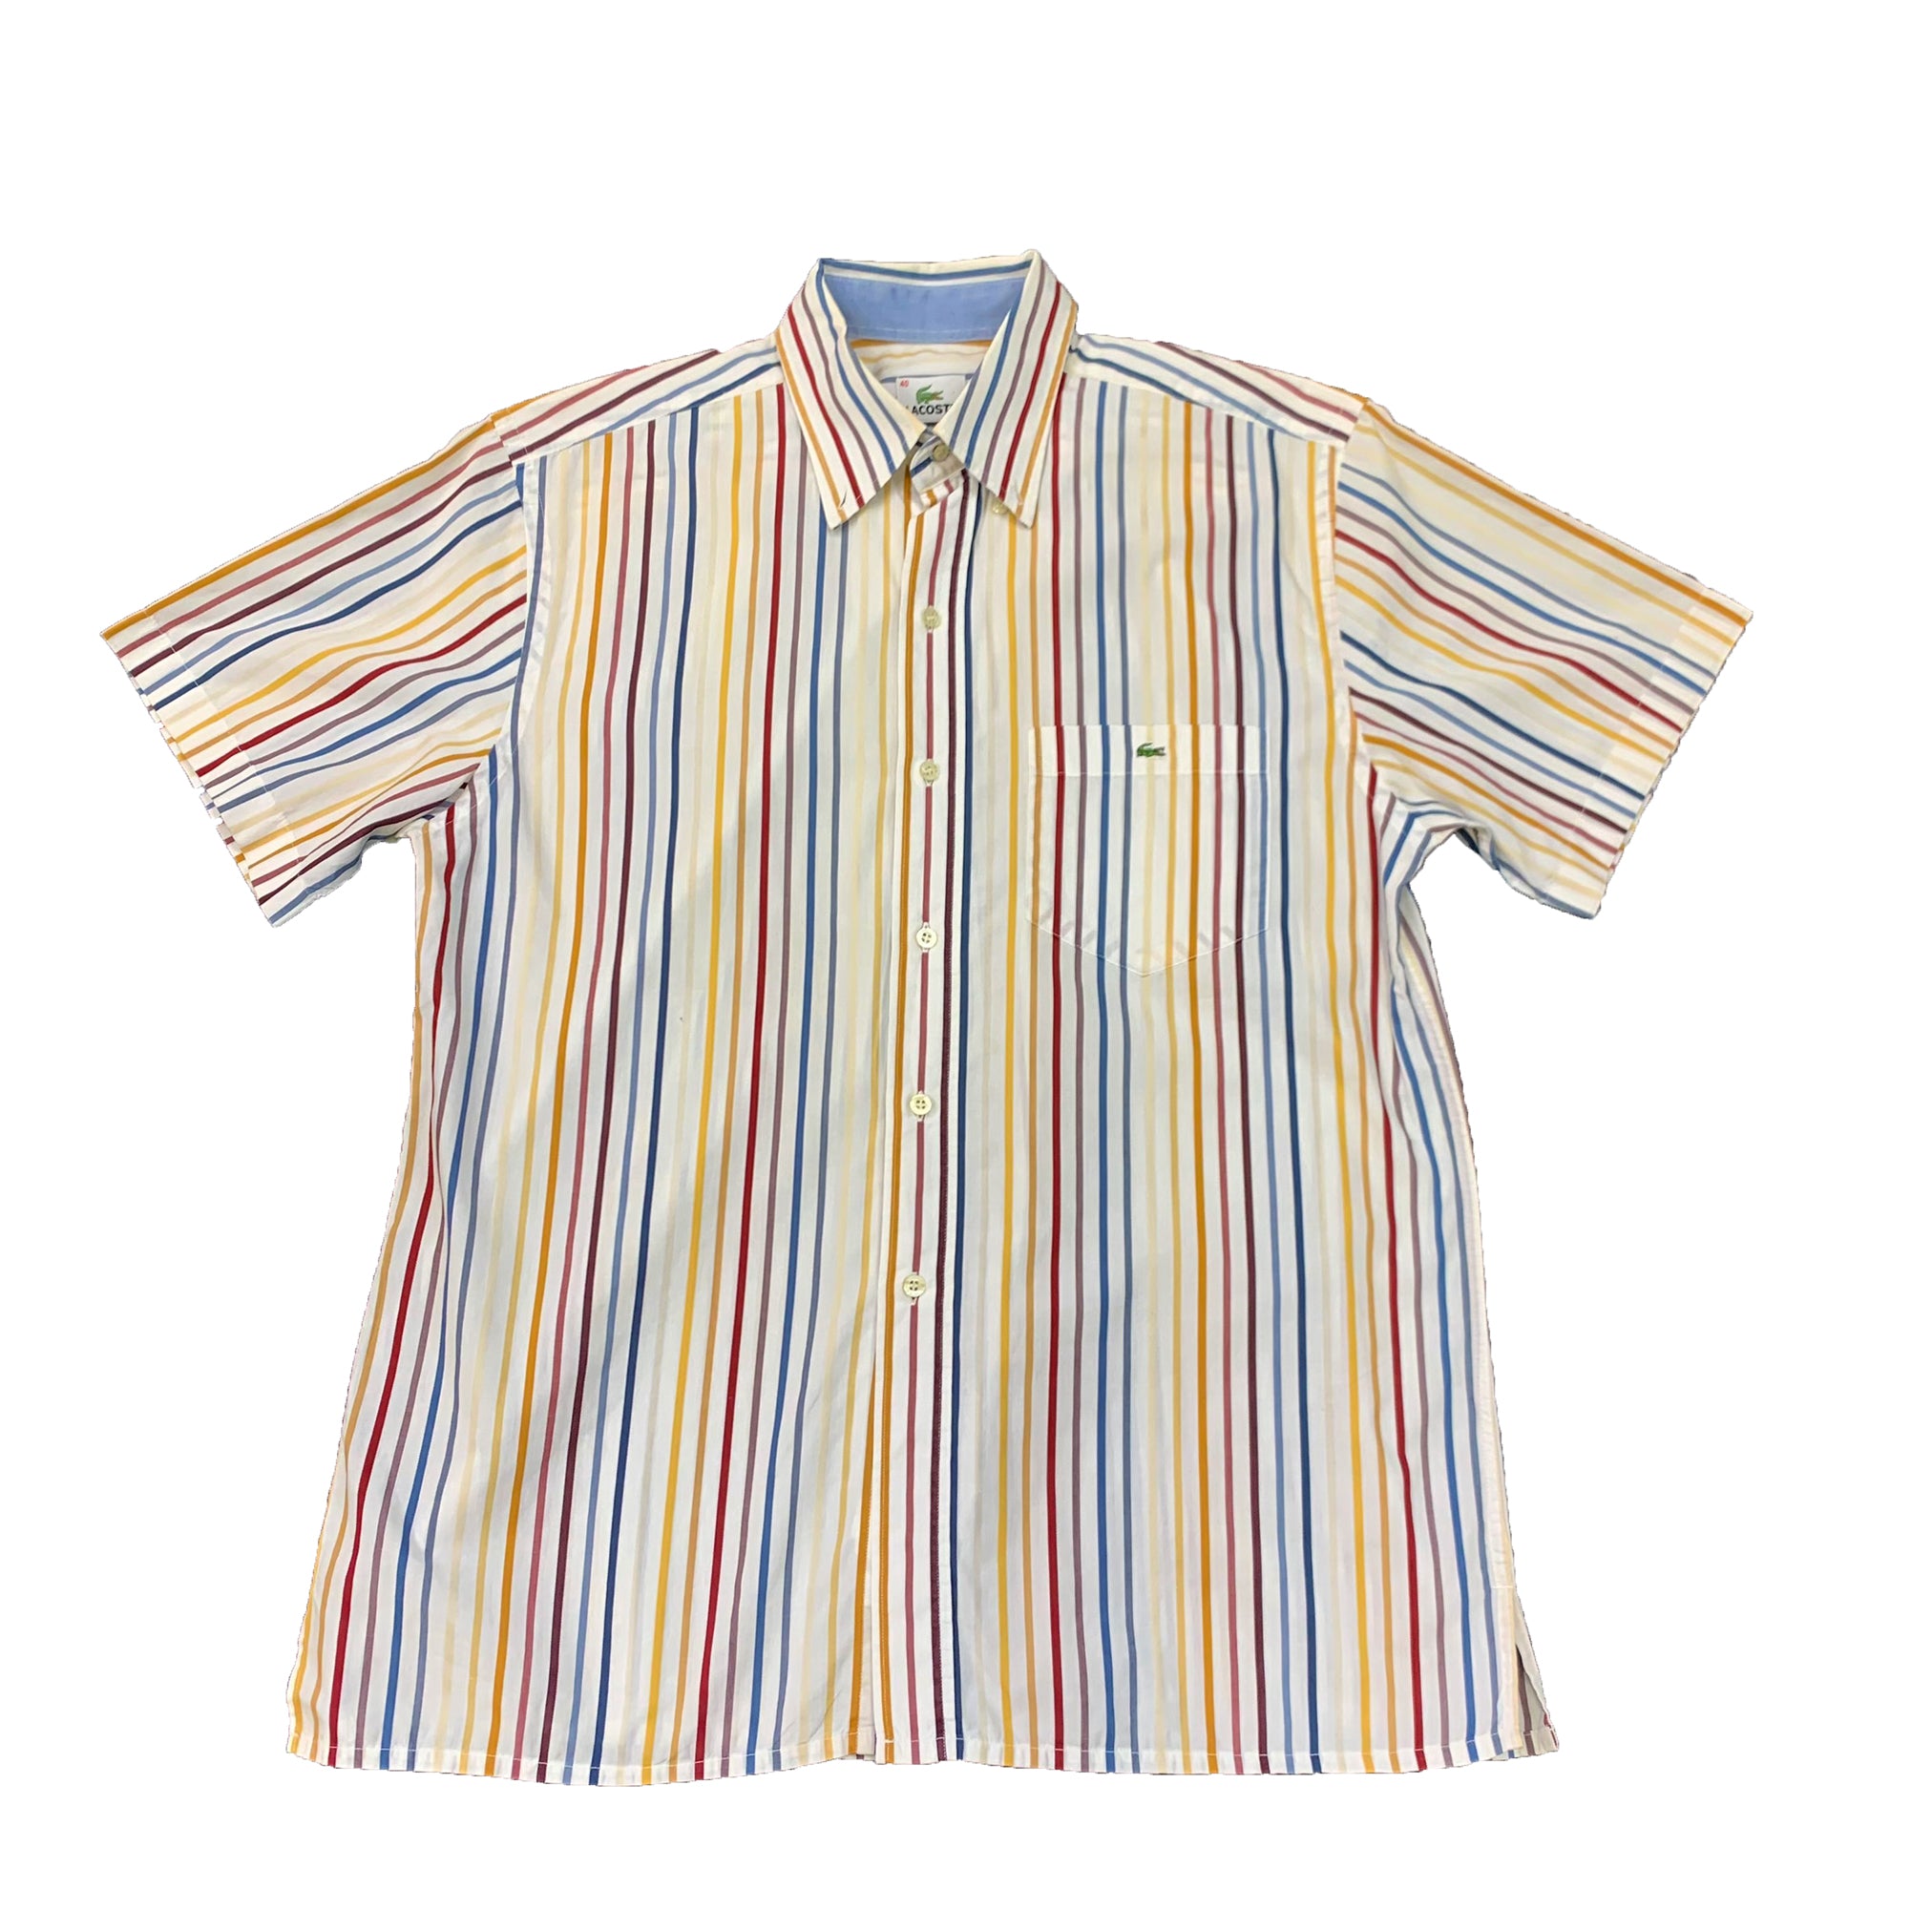 Lacoste Button-up Striped Shirt (Short Sleeve)